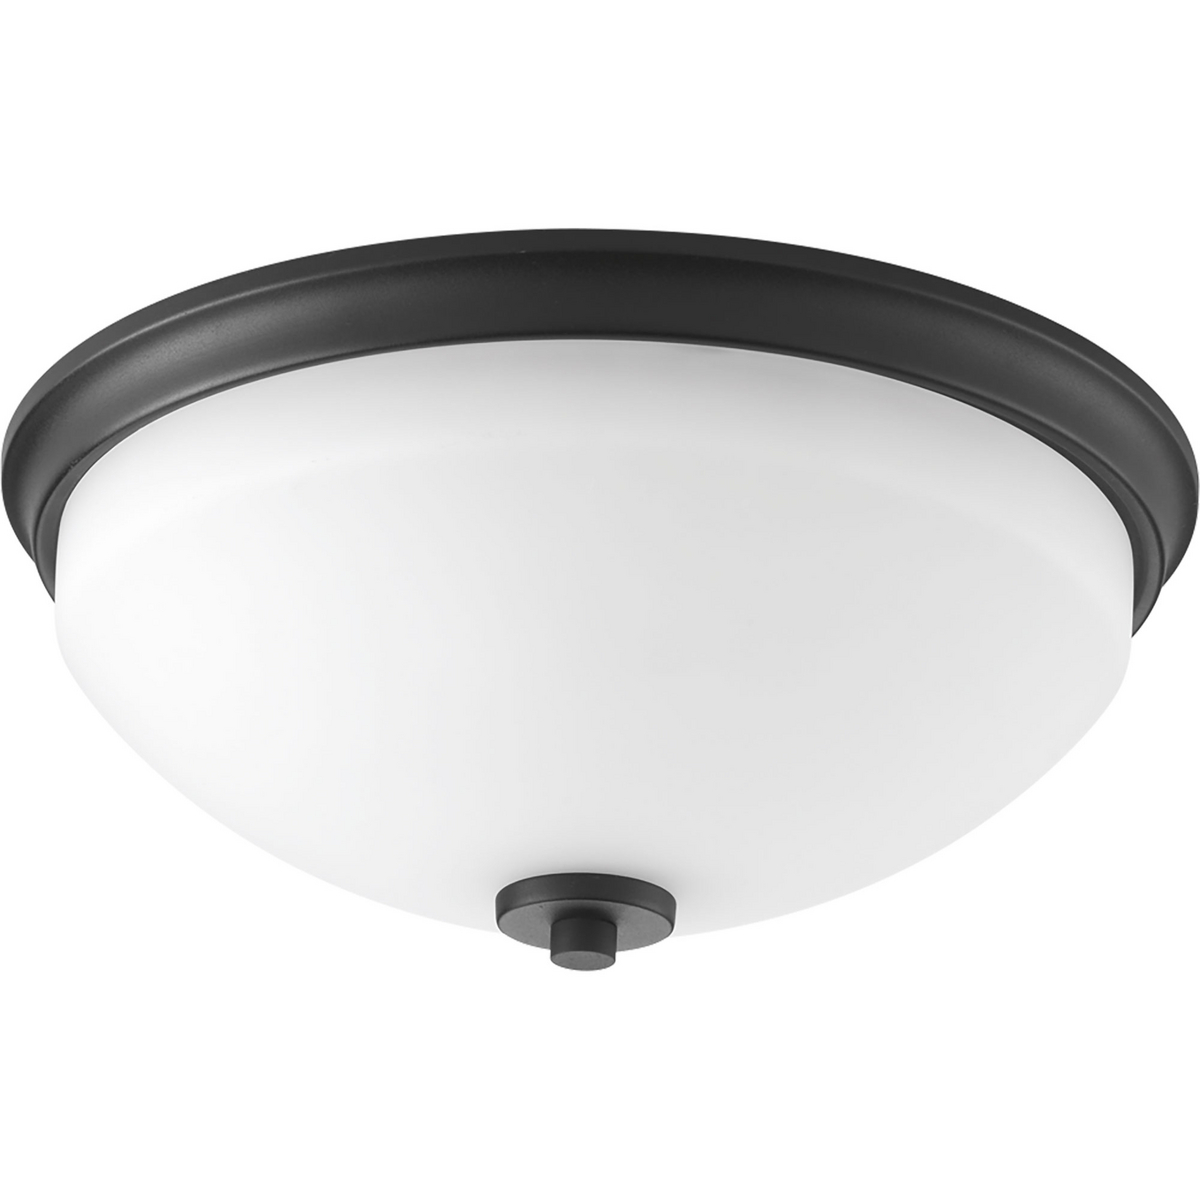 P3423-31 785247185870 Two-light flush mount from the Replay Collection, smooth forms, linear details and a pleasingly elegant frame enhance a simplified modern look. Black finish.